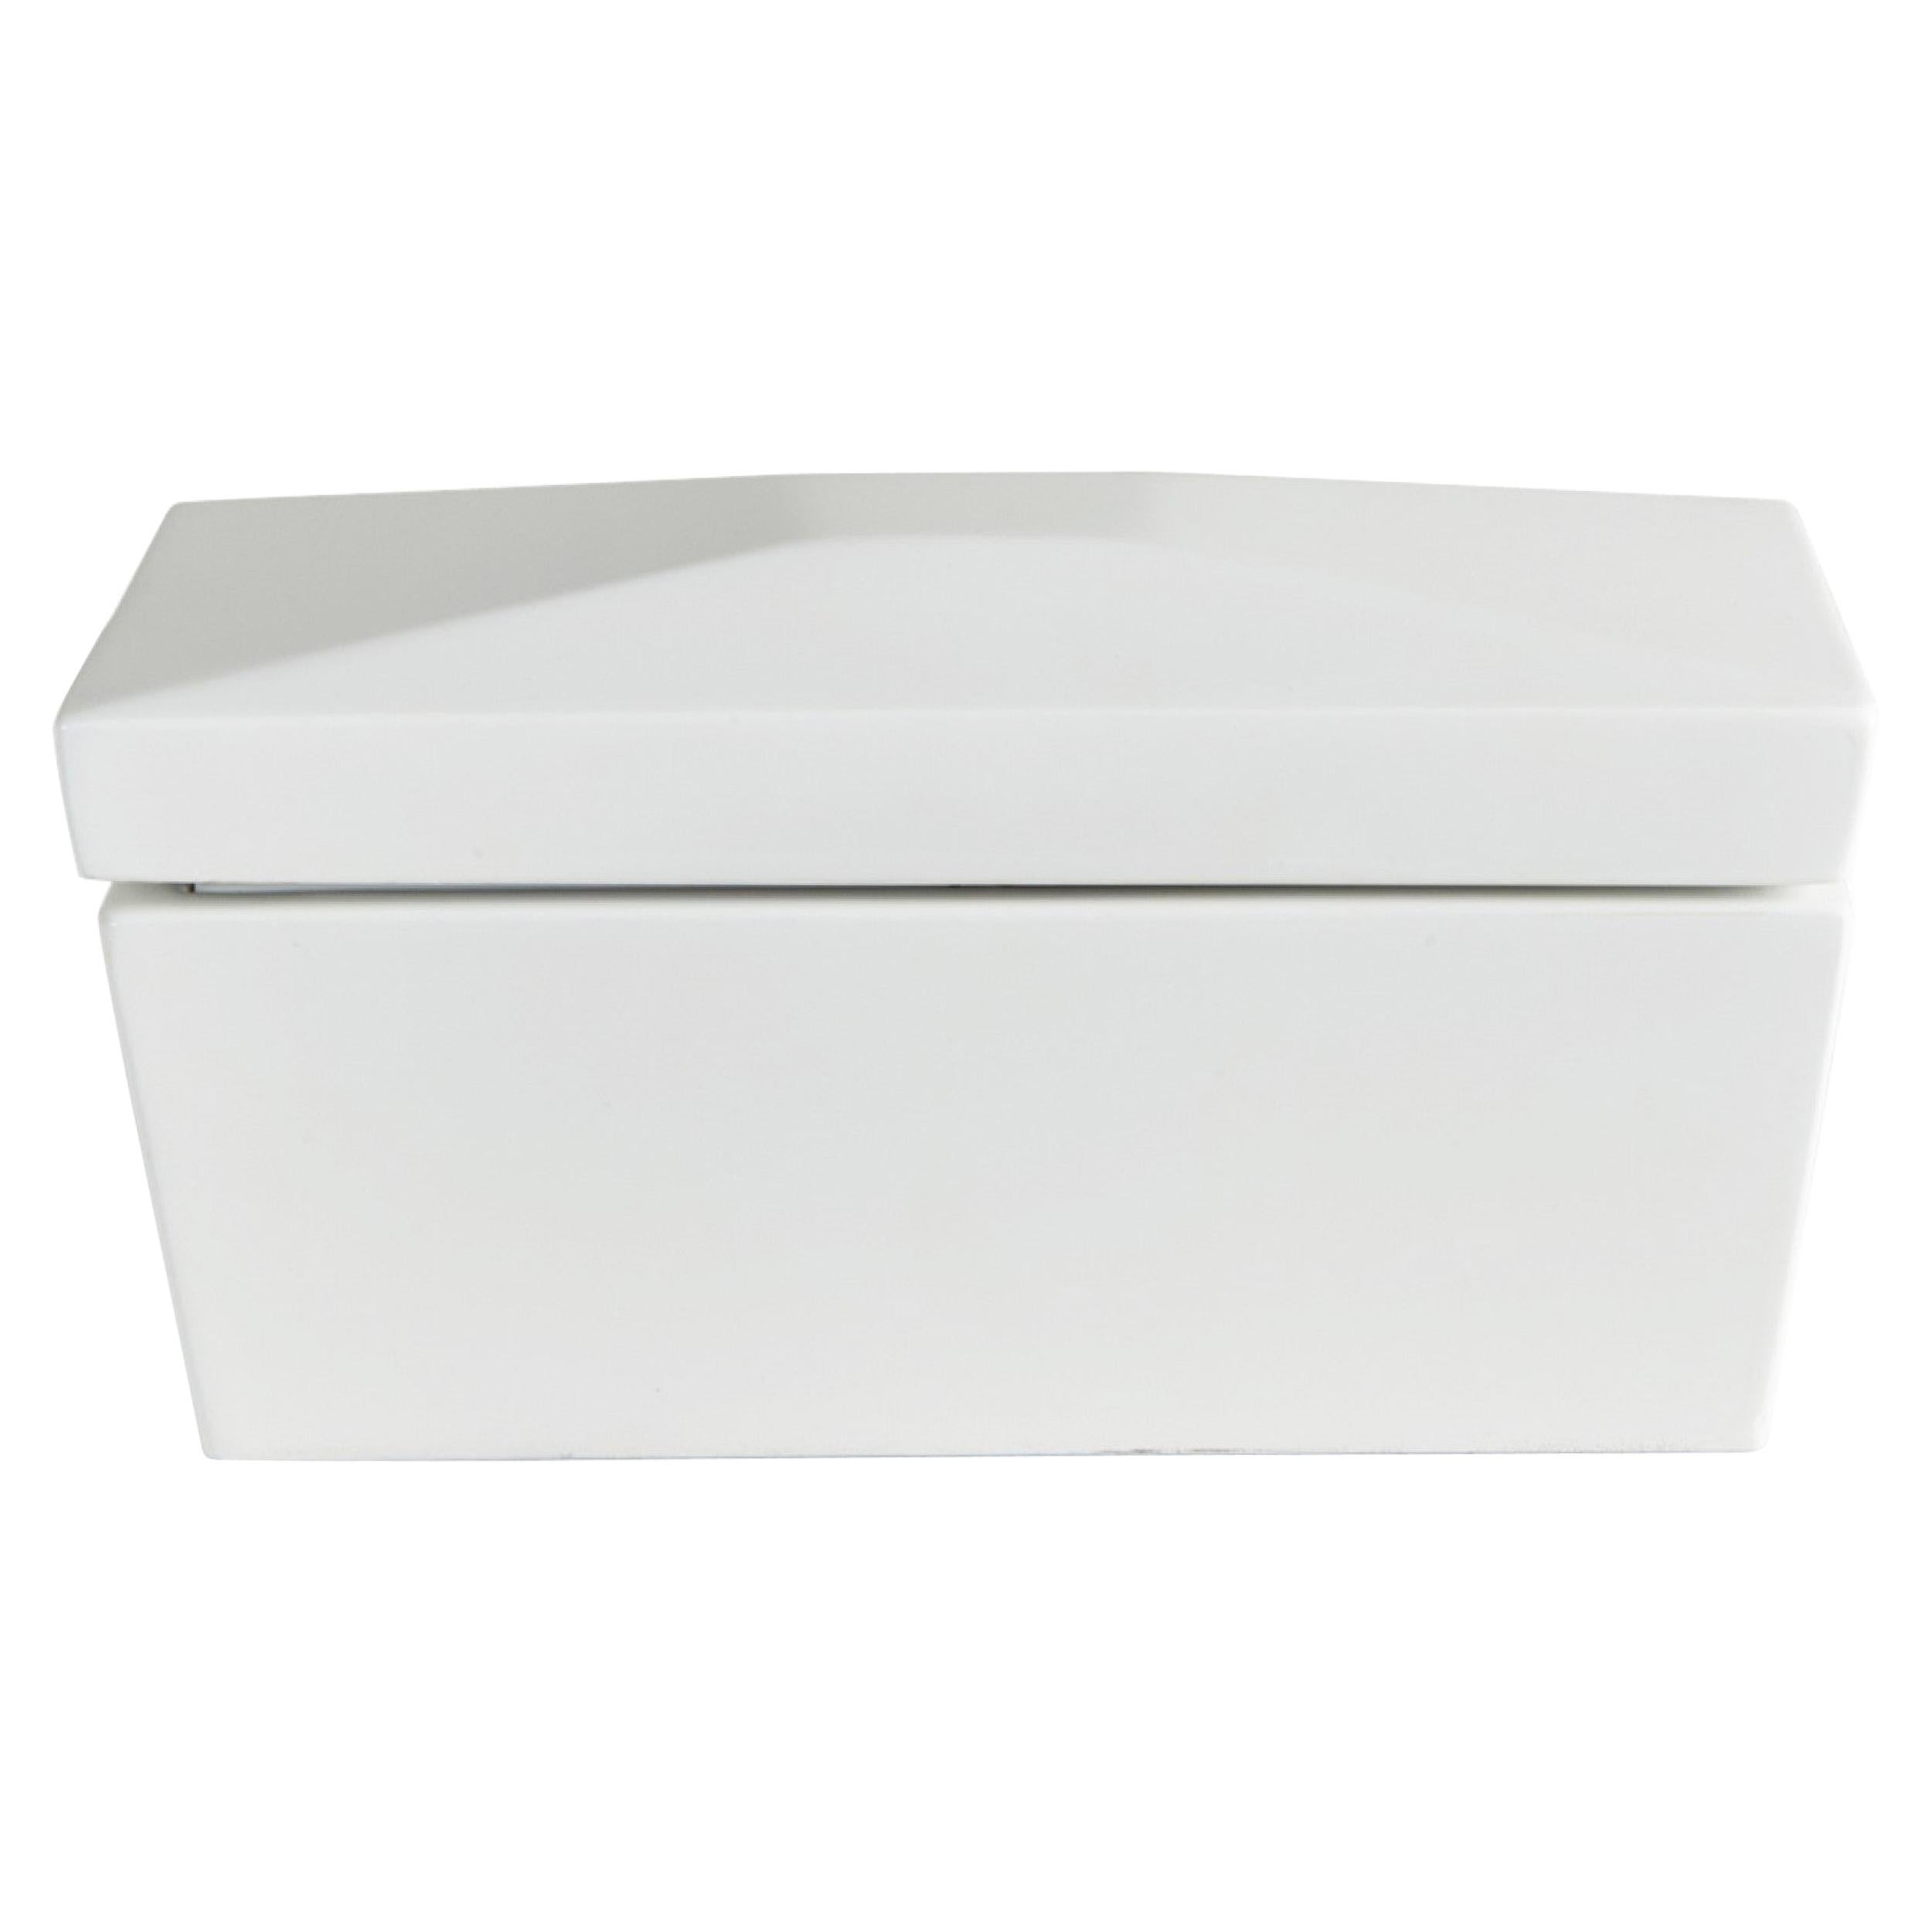 Custom Contemporary White Lacquered Rectangular Wooden Decorative Box For Sale